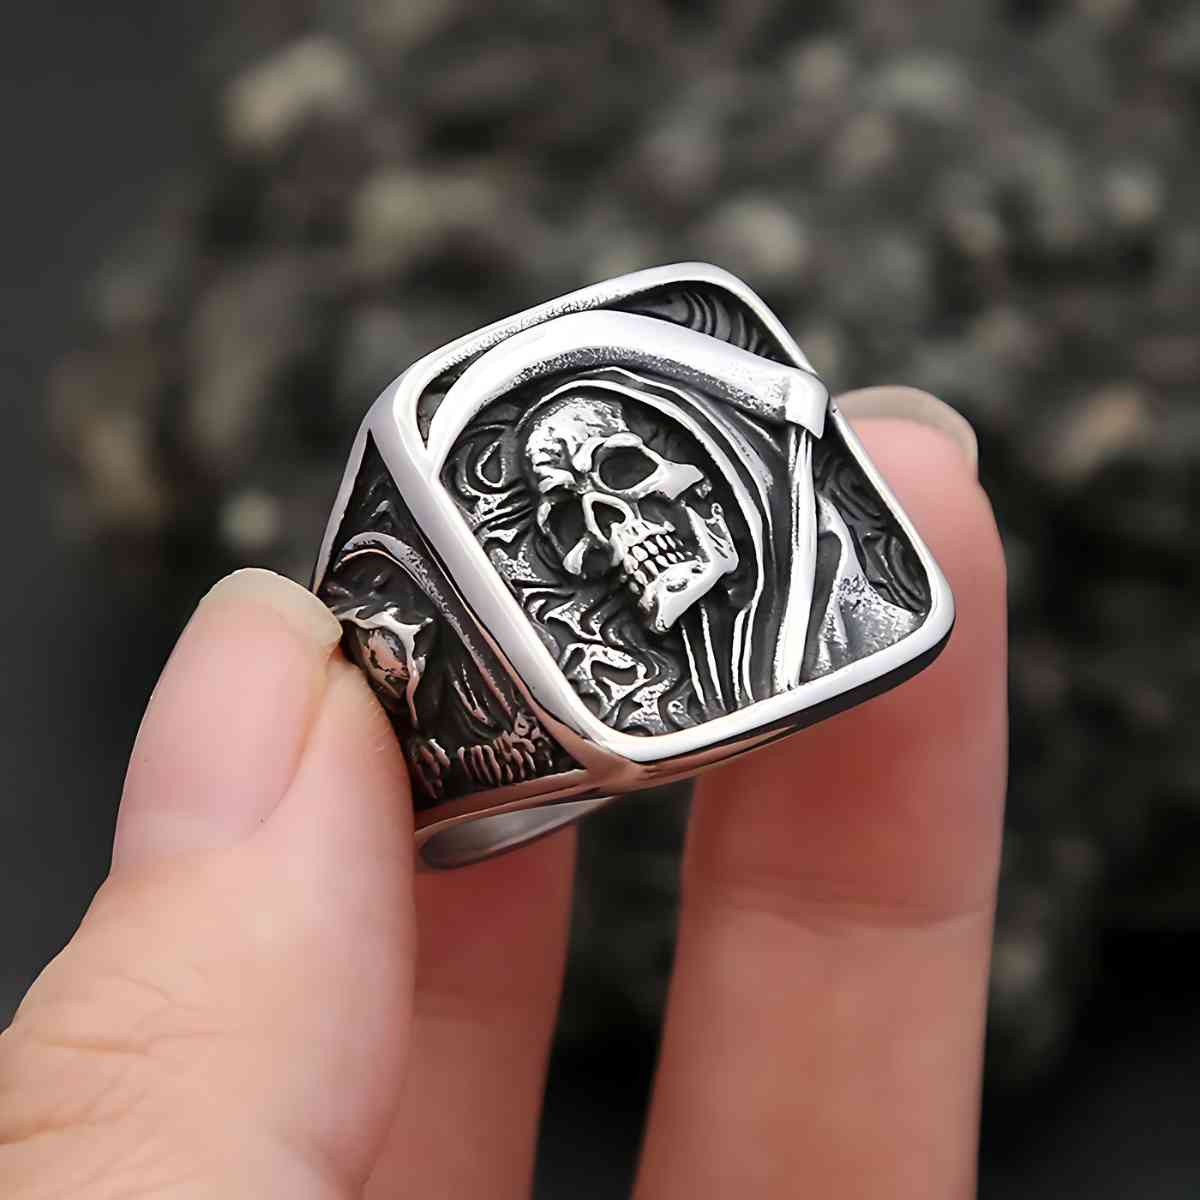 Scythe Ring Stainless Steel Xenos Jewelry